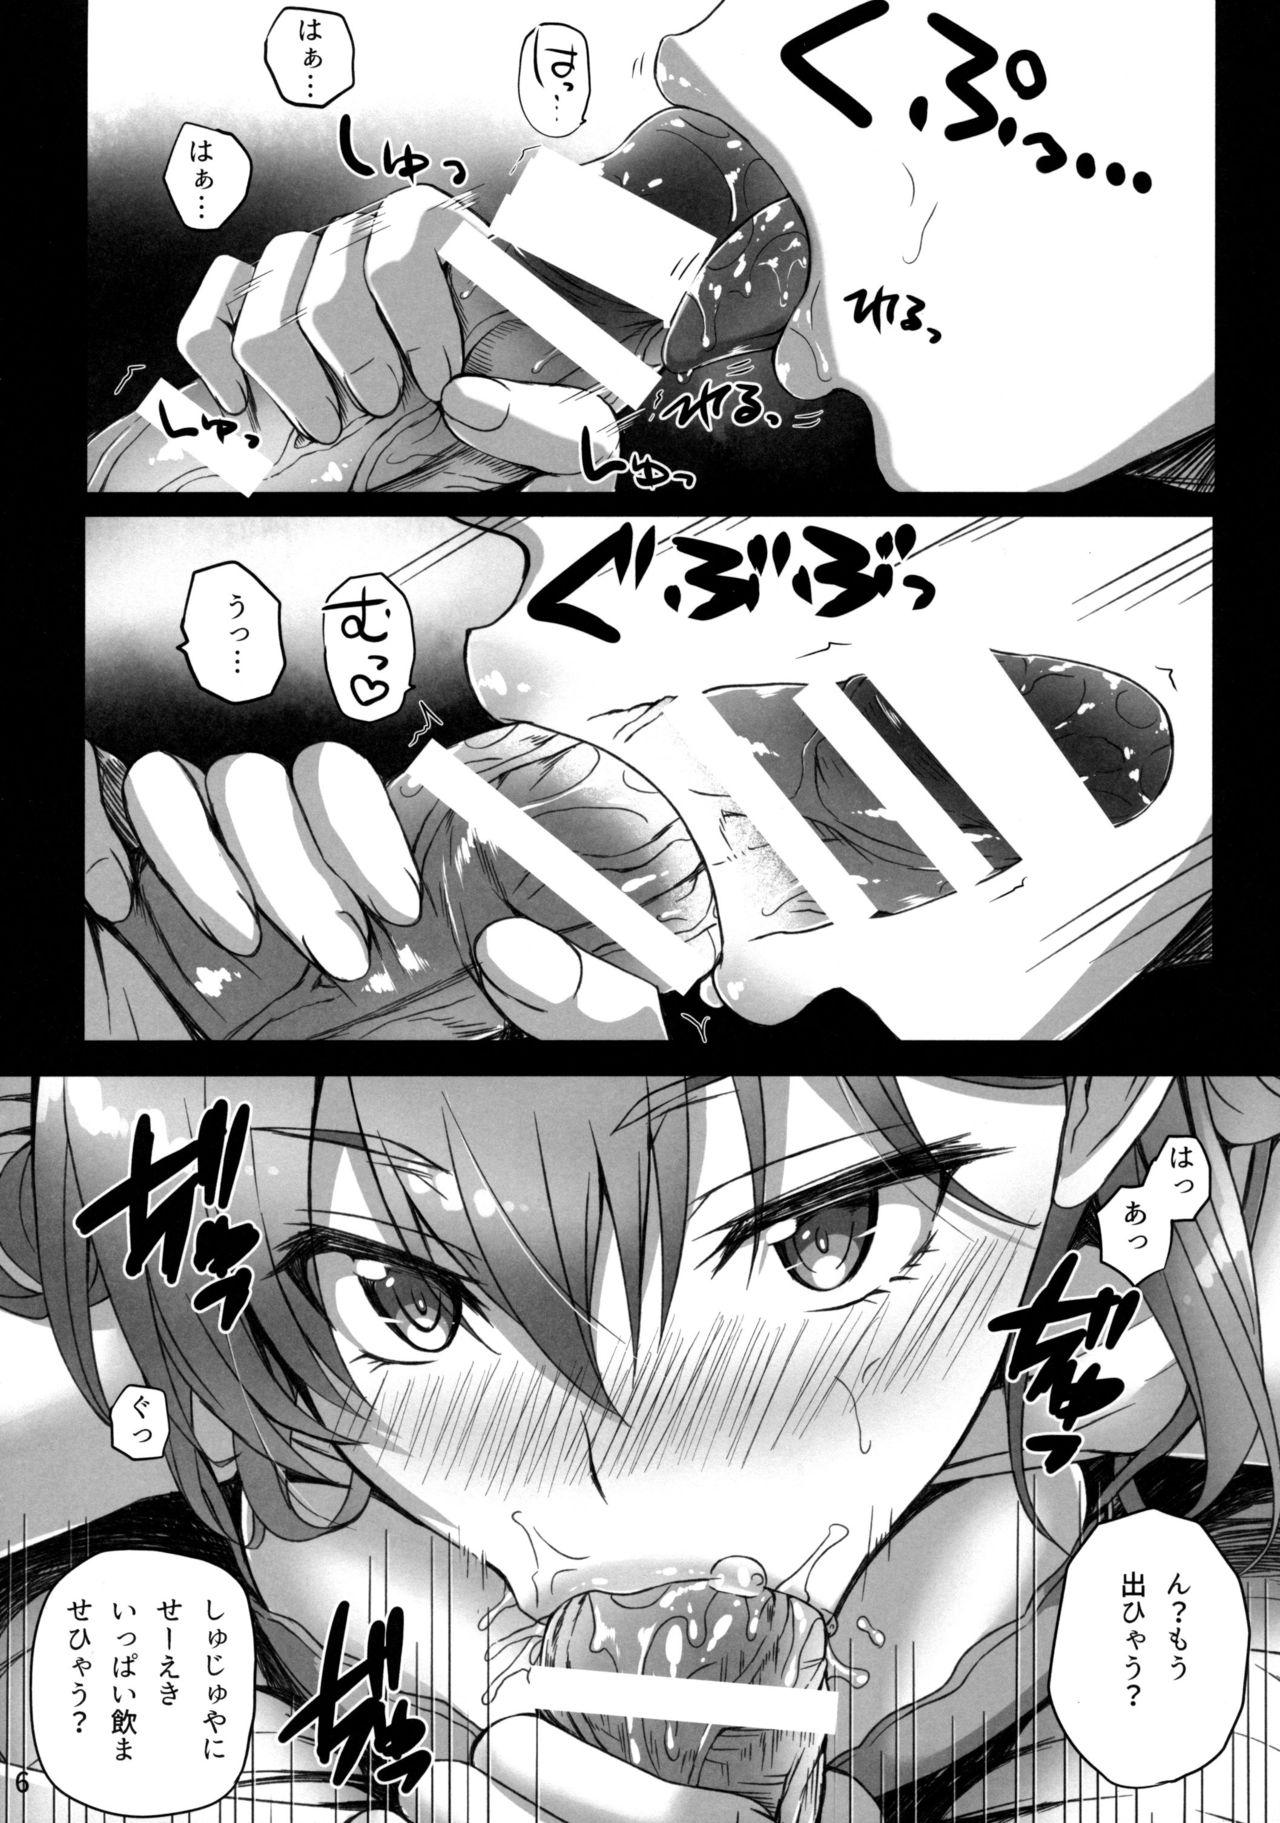 Sesso Suzuya no! - Kantai collection Curious - Page 7